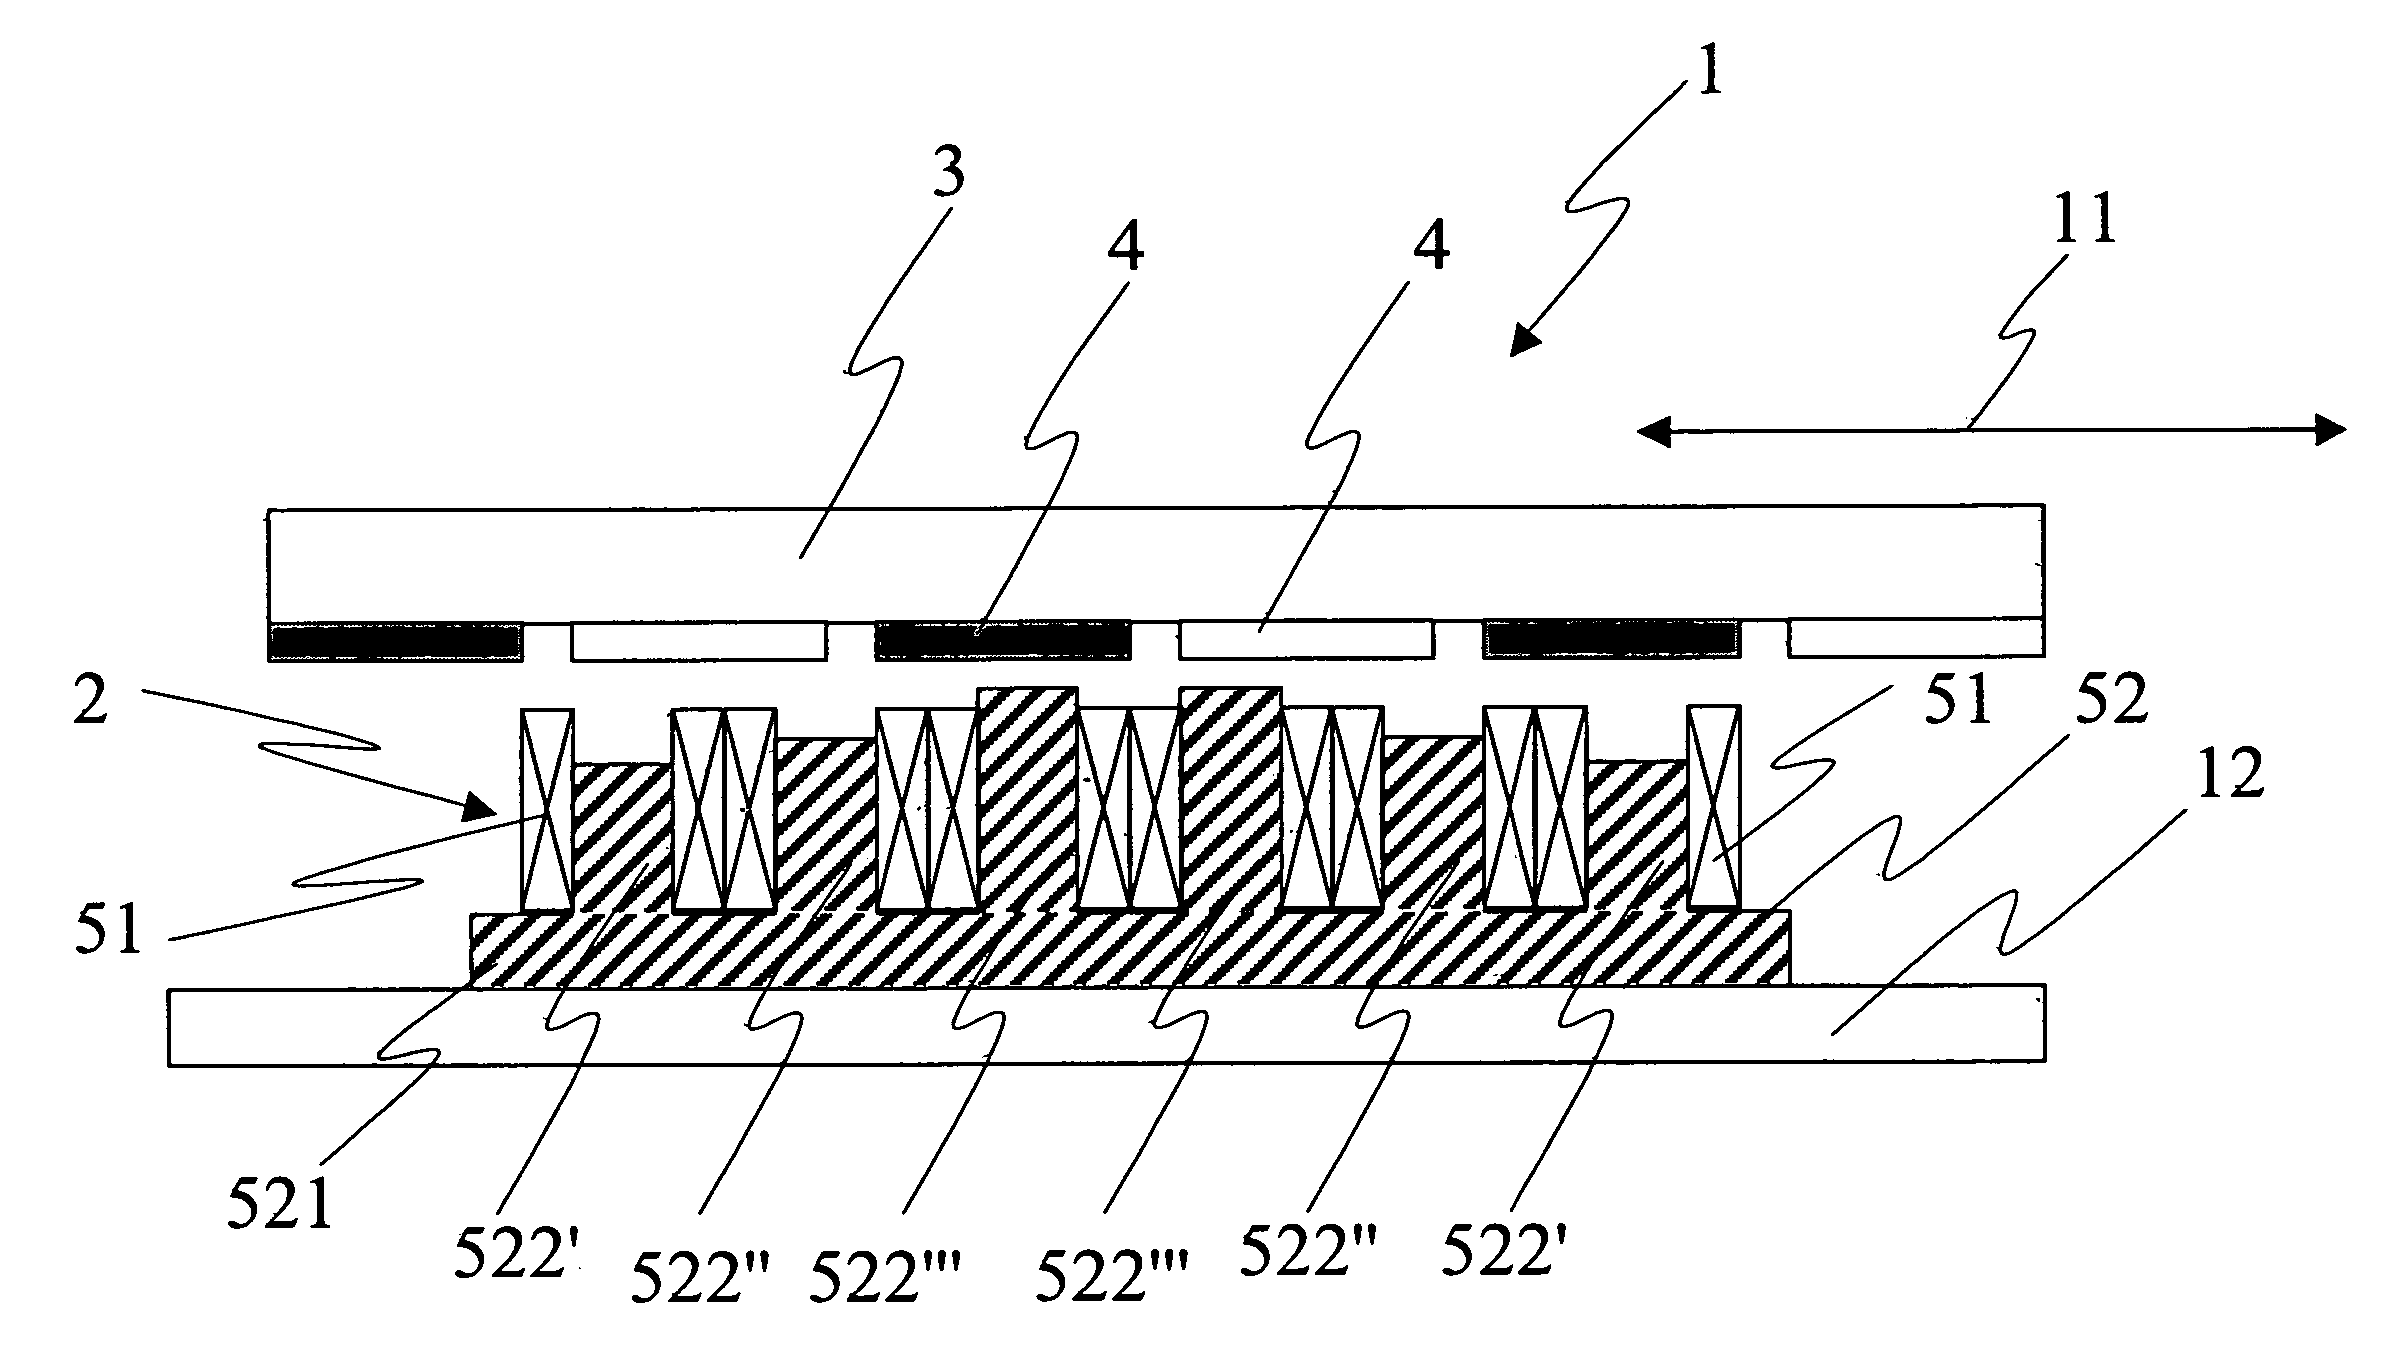 Iron core linear motor having low detent force with high power density